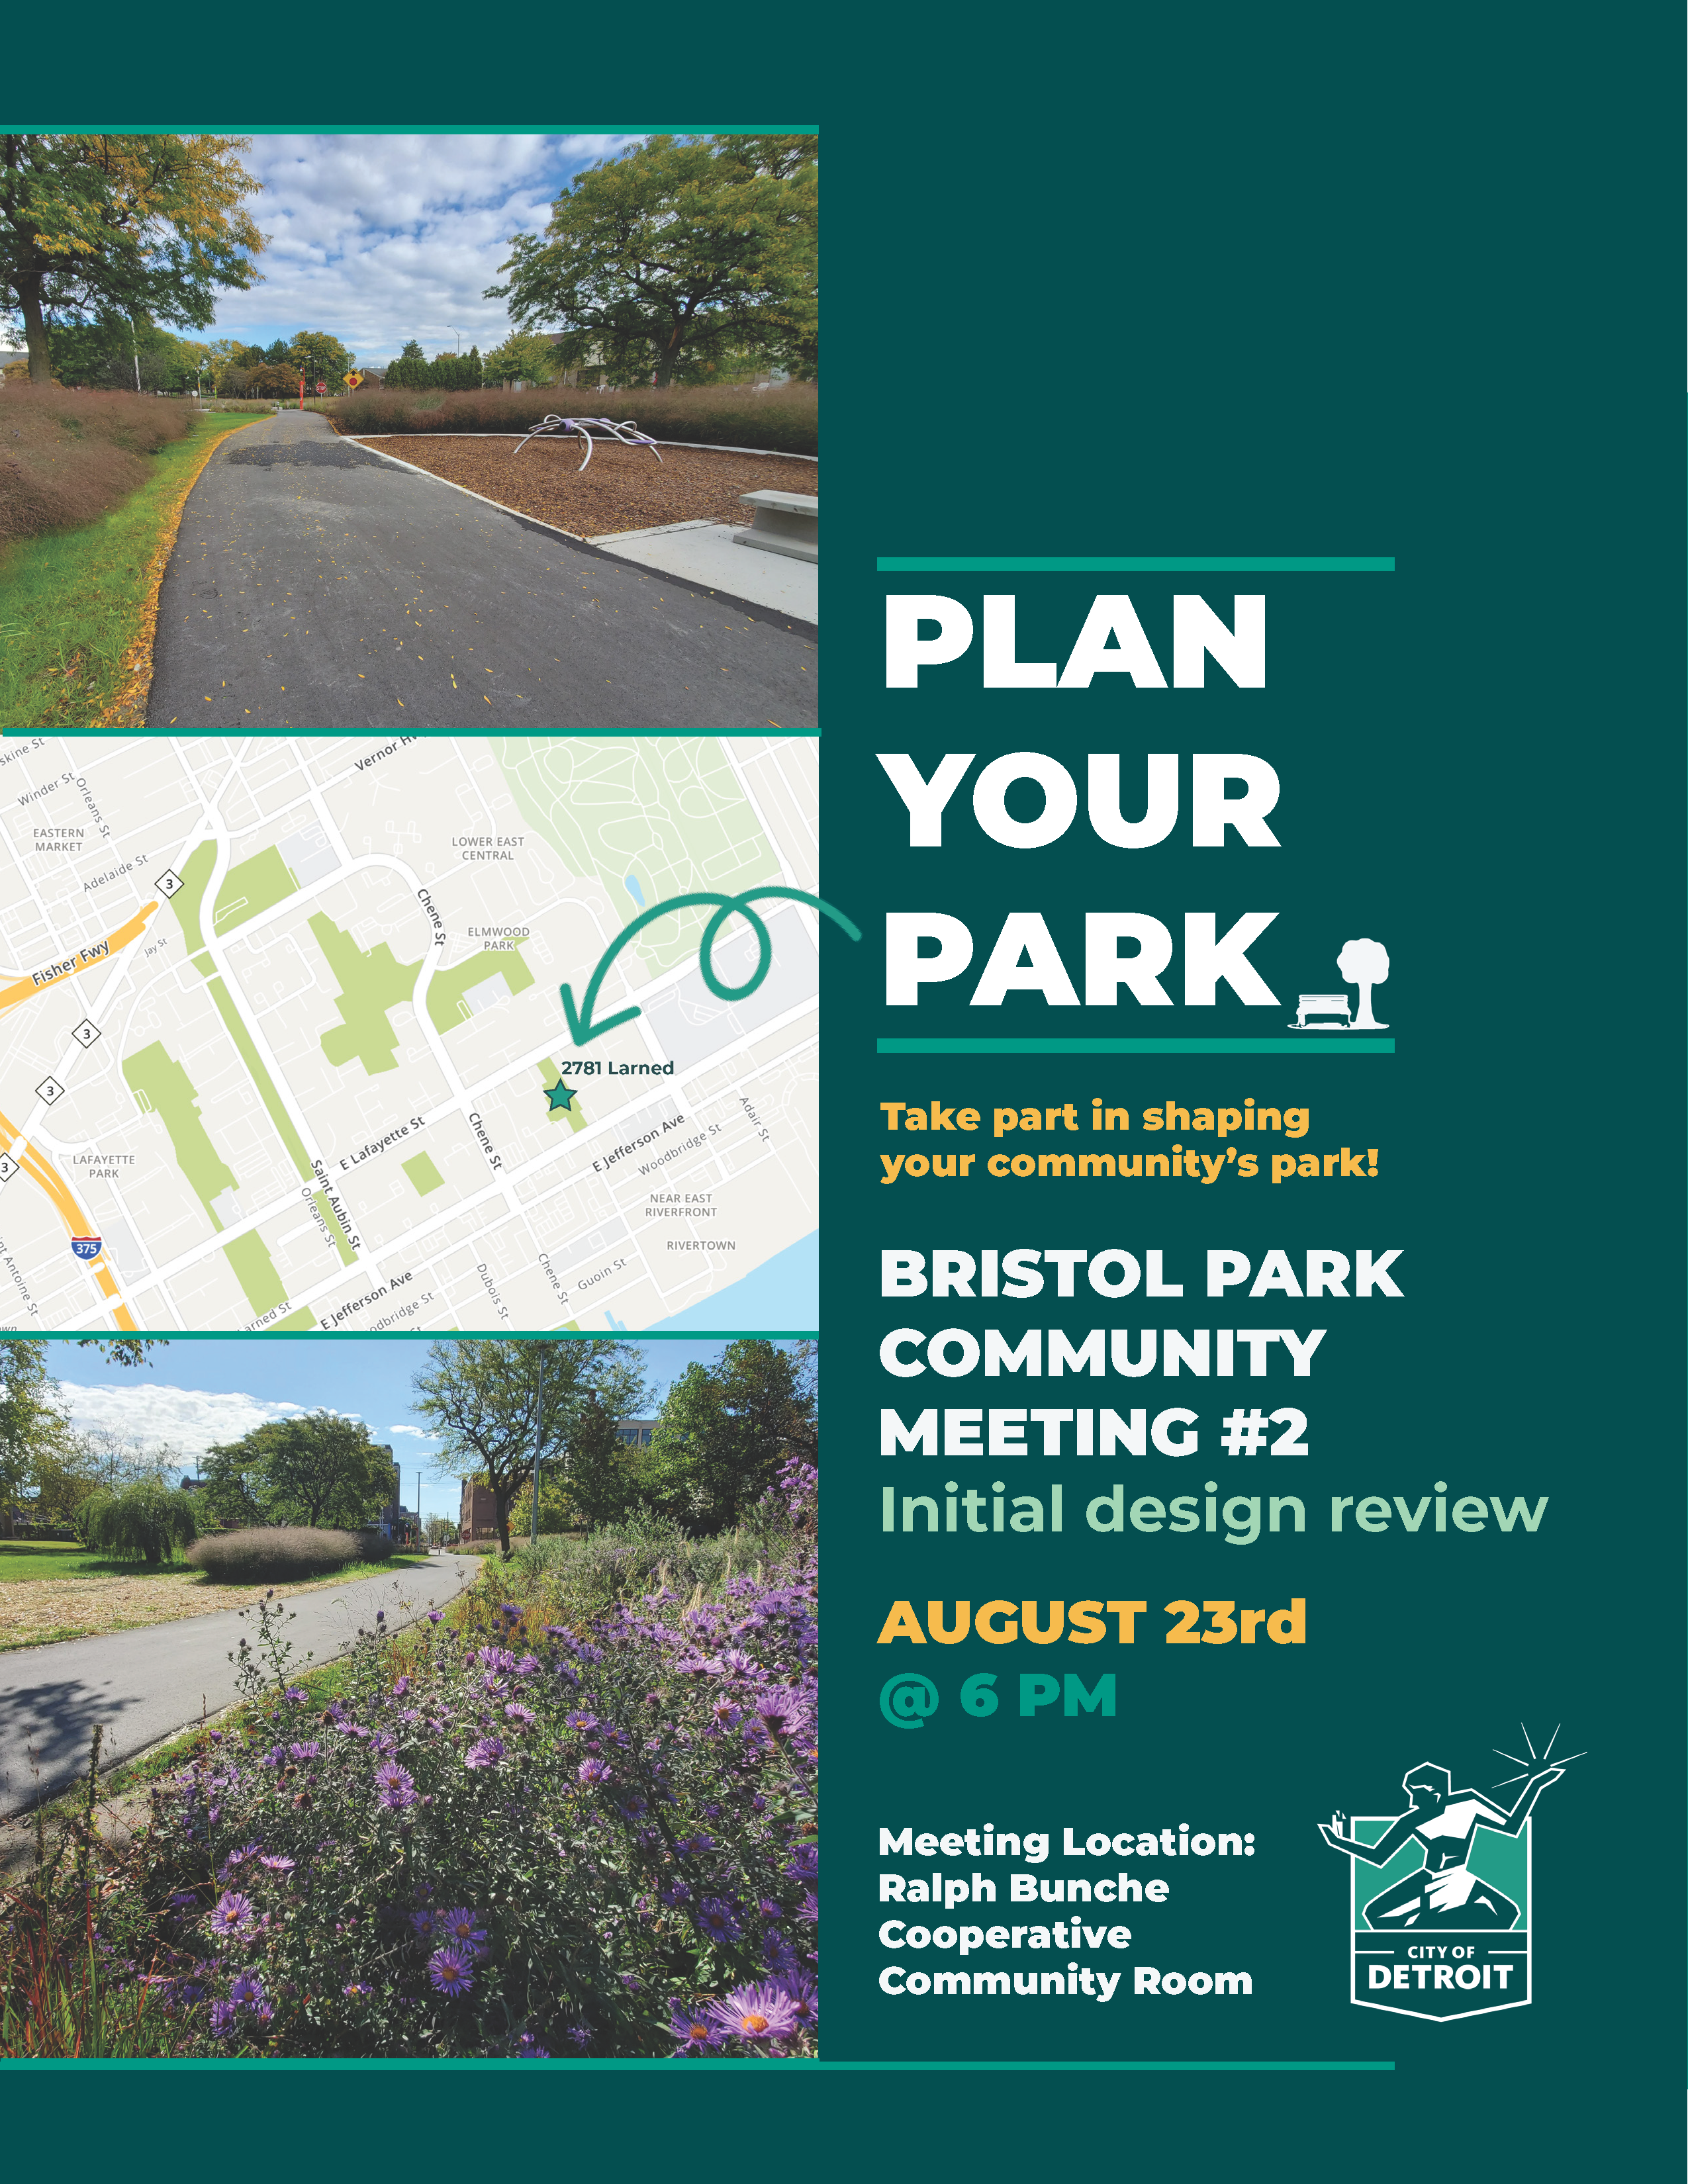 PLAN YOUR PARK: Bristol Park Community Meeting #2. Initial Design Review. August 23 at 6pm. Location: Ralph Bunche Co-op Community Room.